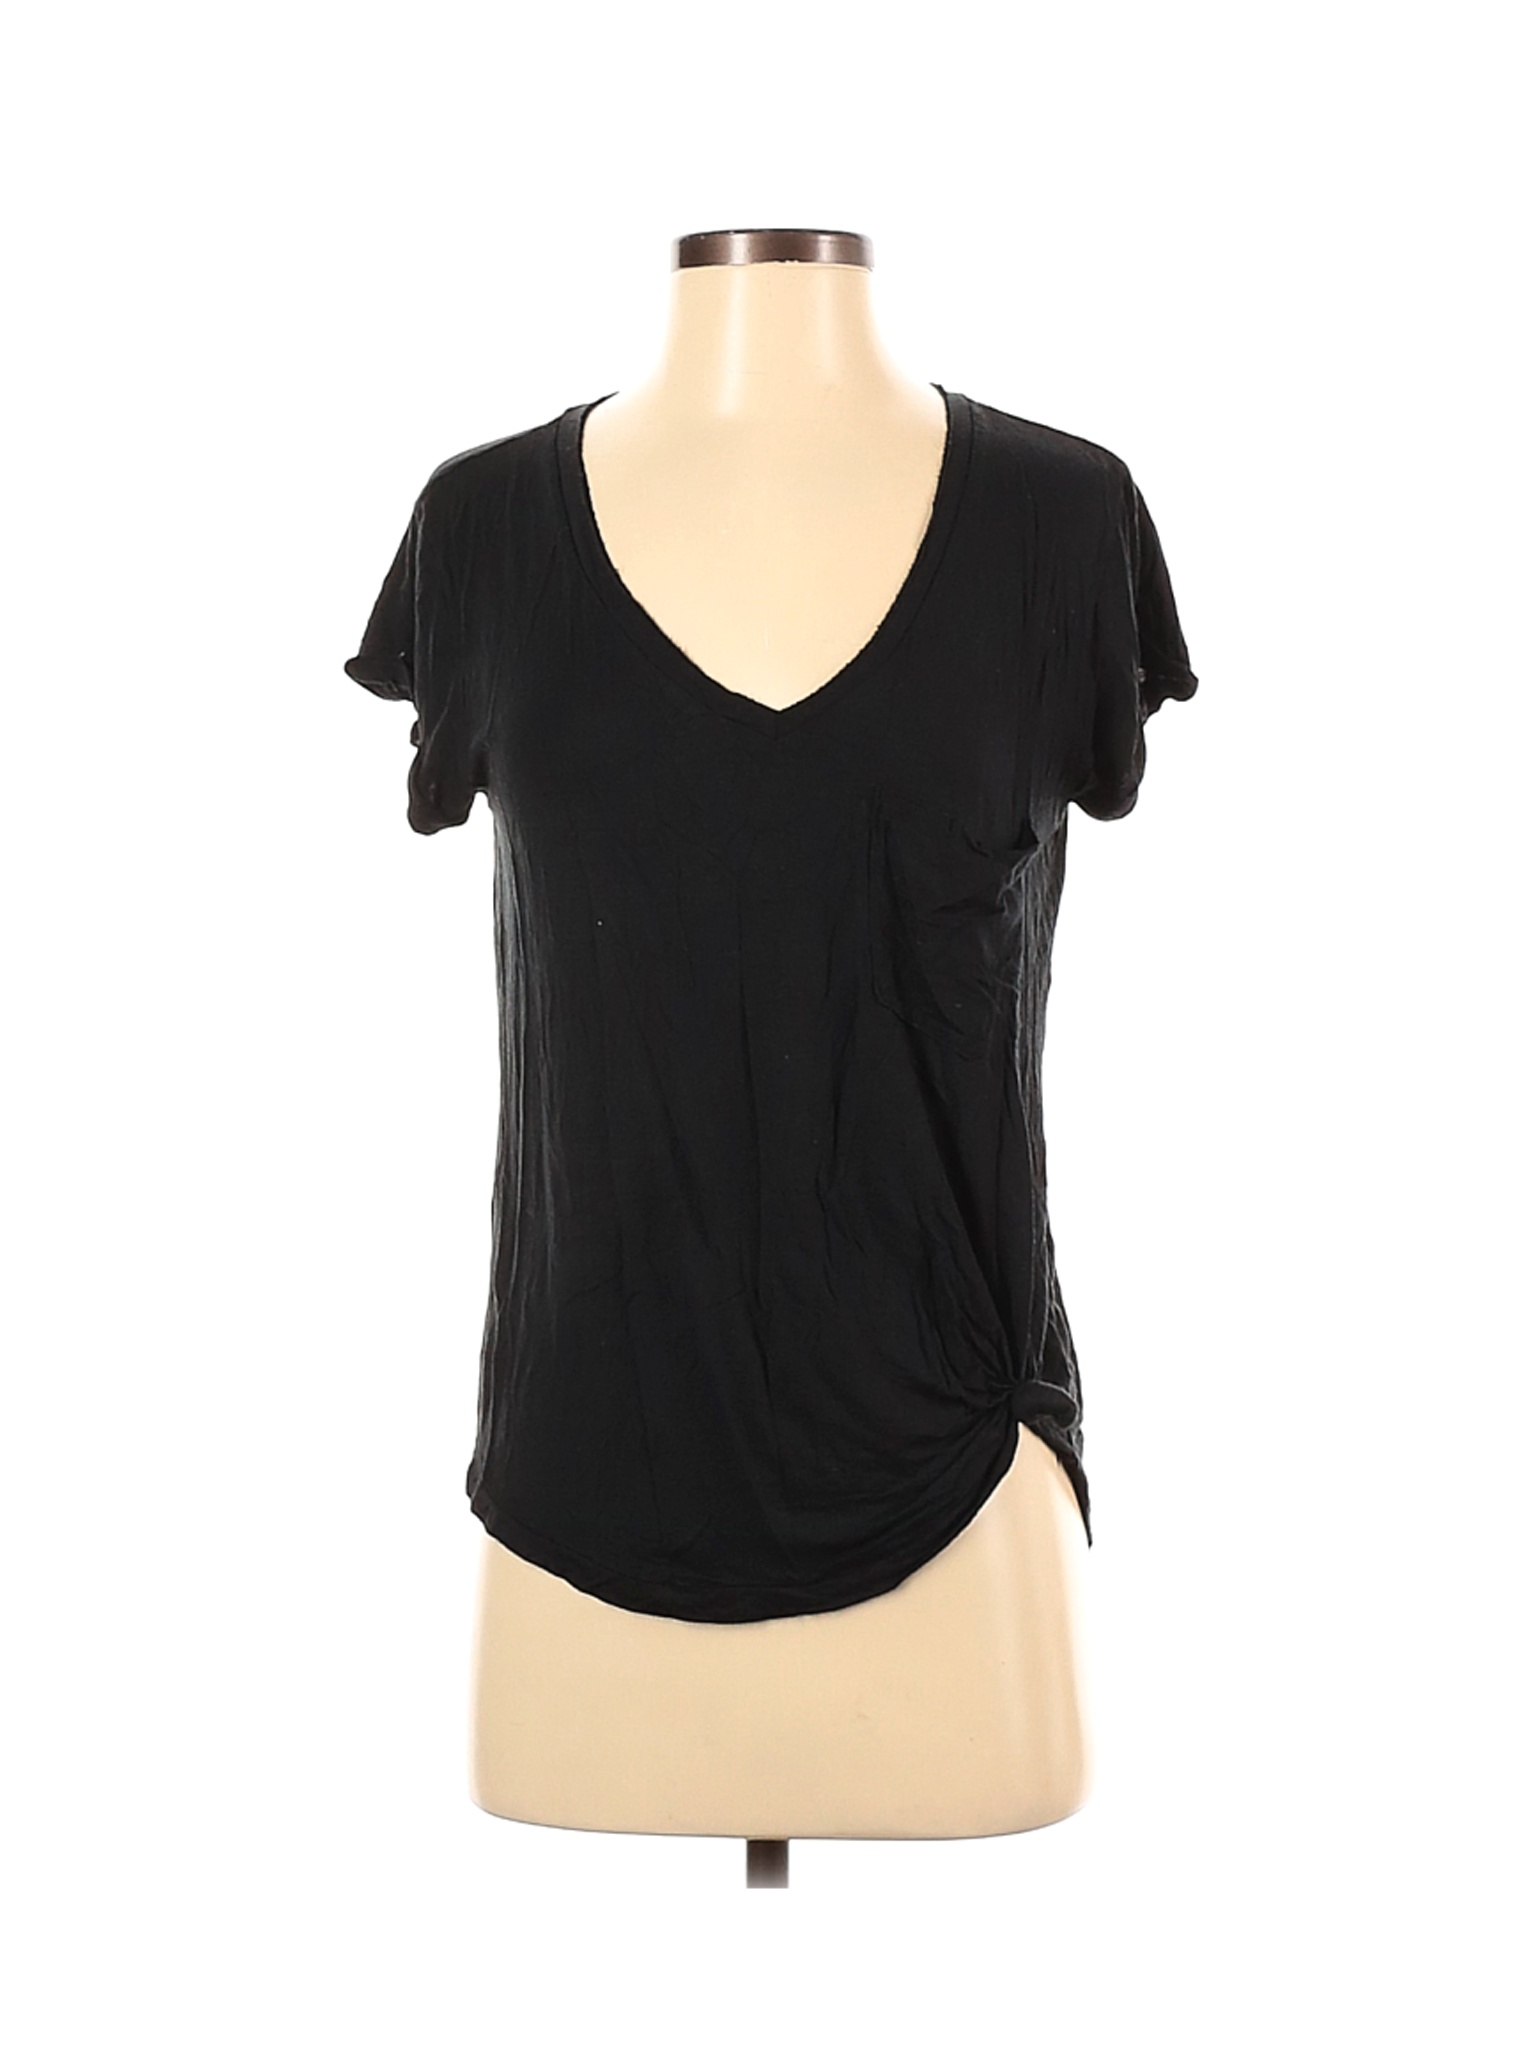 American Eagle Outfitters Women Black Sleeveless Top S | eBay